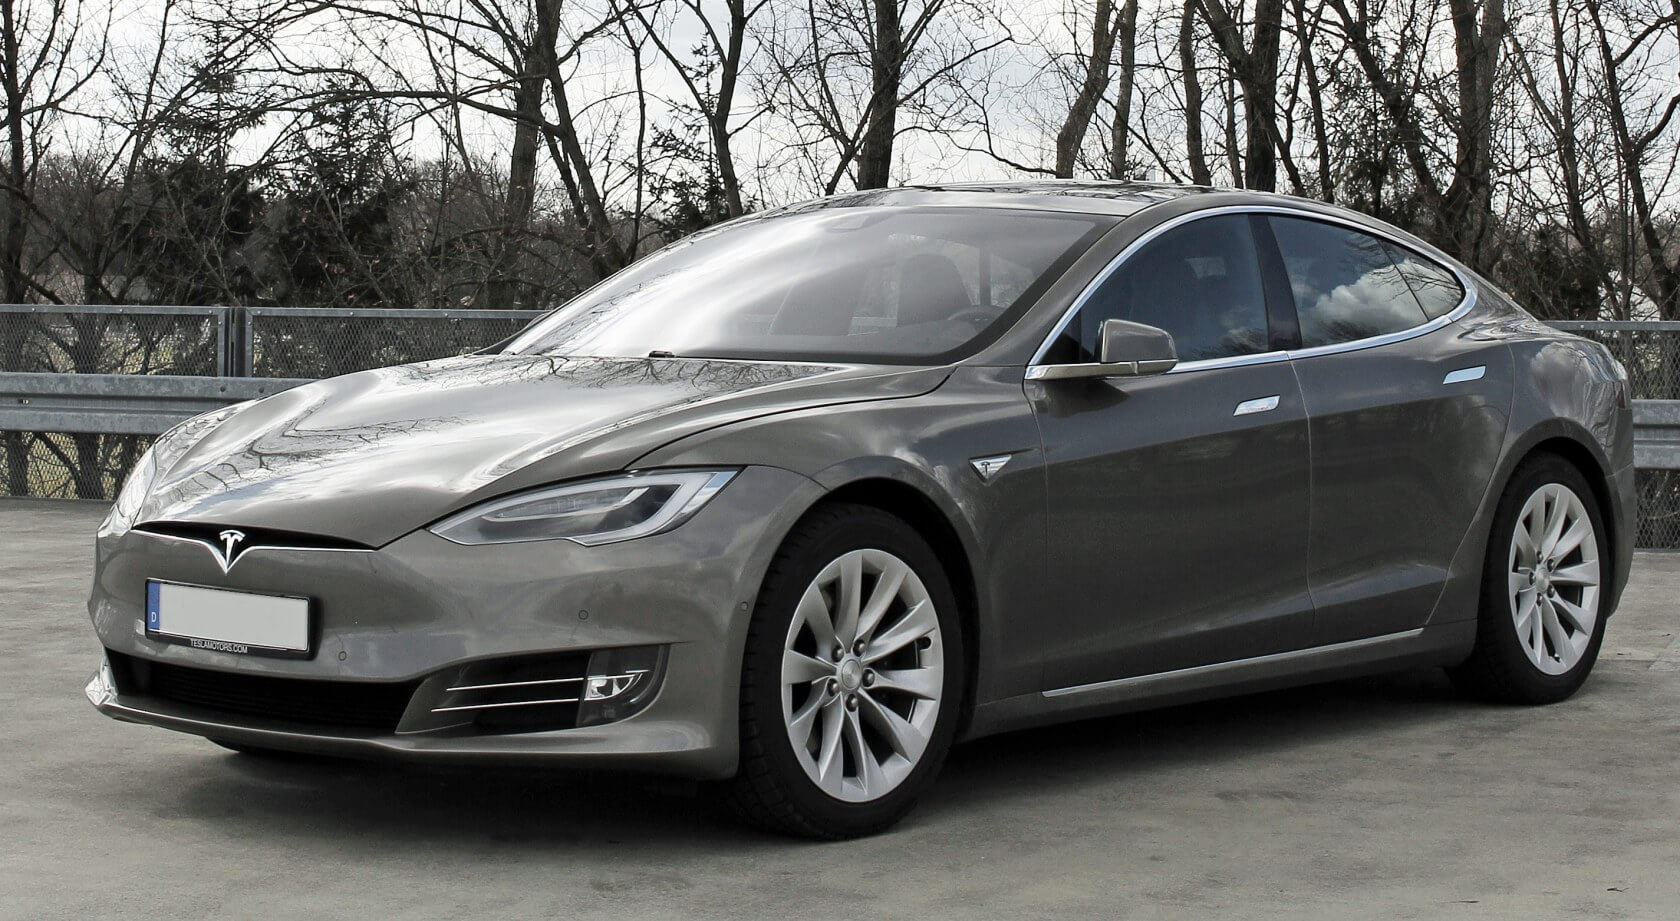 A 'refreshed' Tesla Model S may have been spotted in the wild